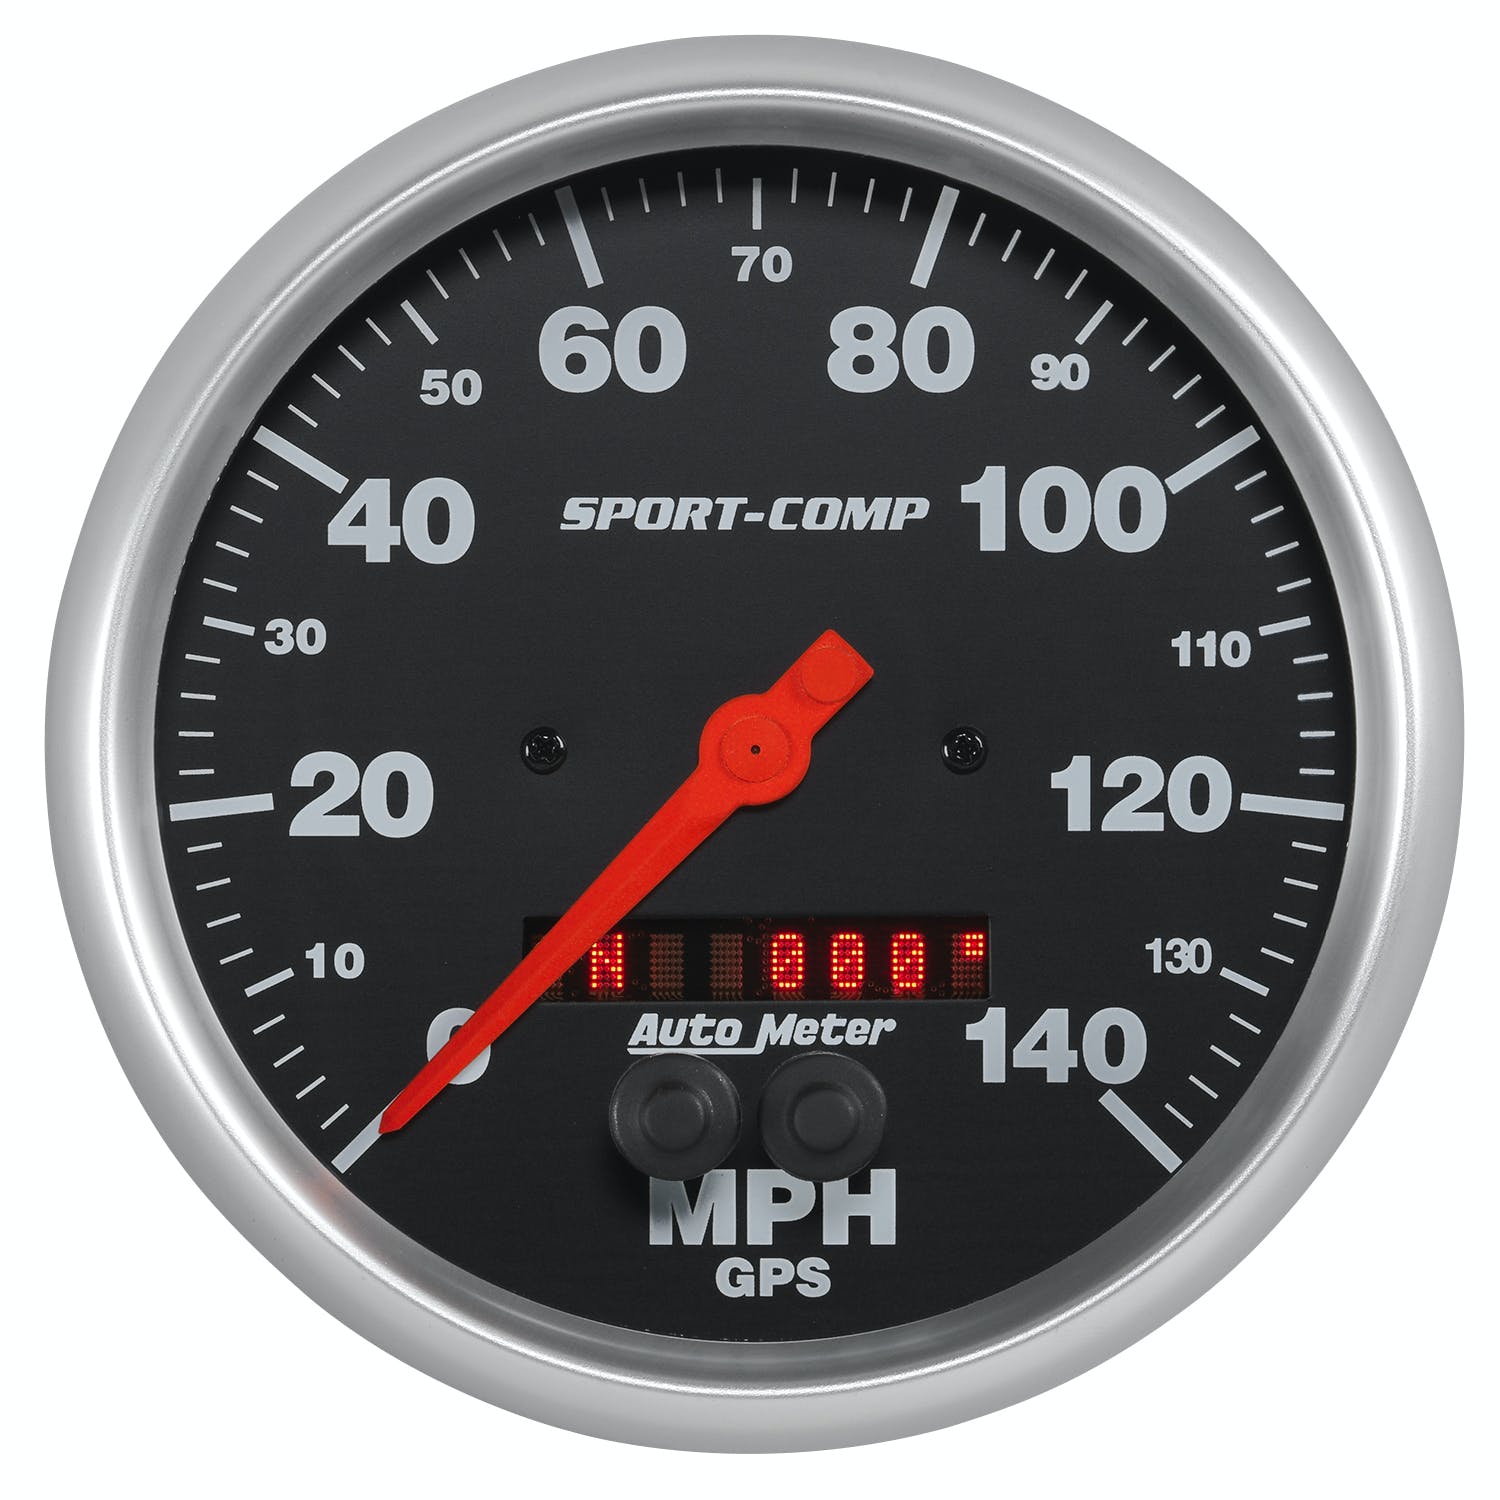 AutoMeter Products 3983 5 GPS Speedometer, 140MPH, Sport Comp